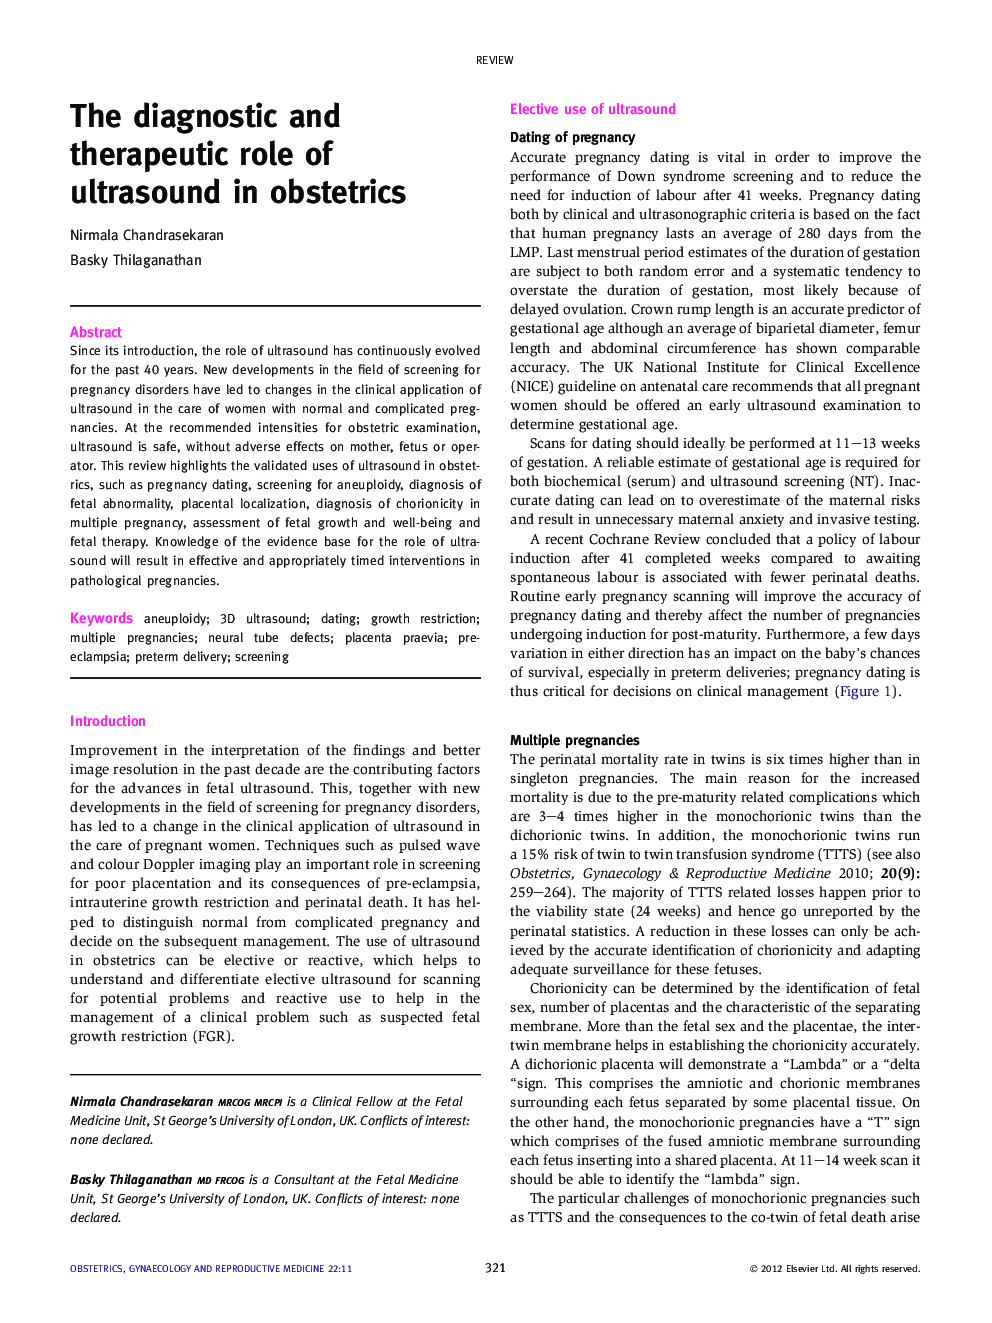 The diagnostic and therapeutic role of ultrasound in obstetrics